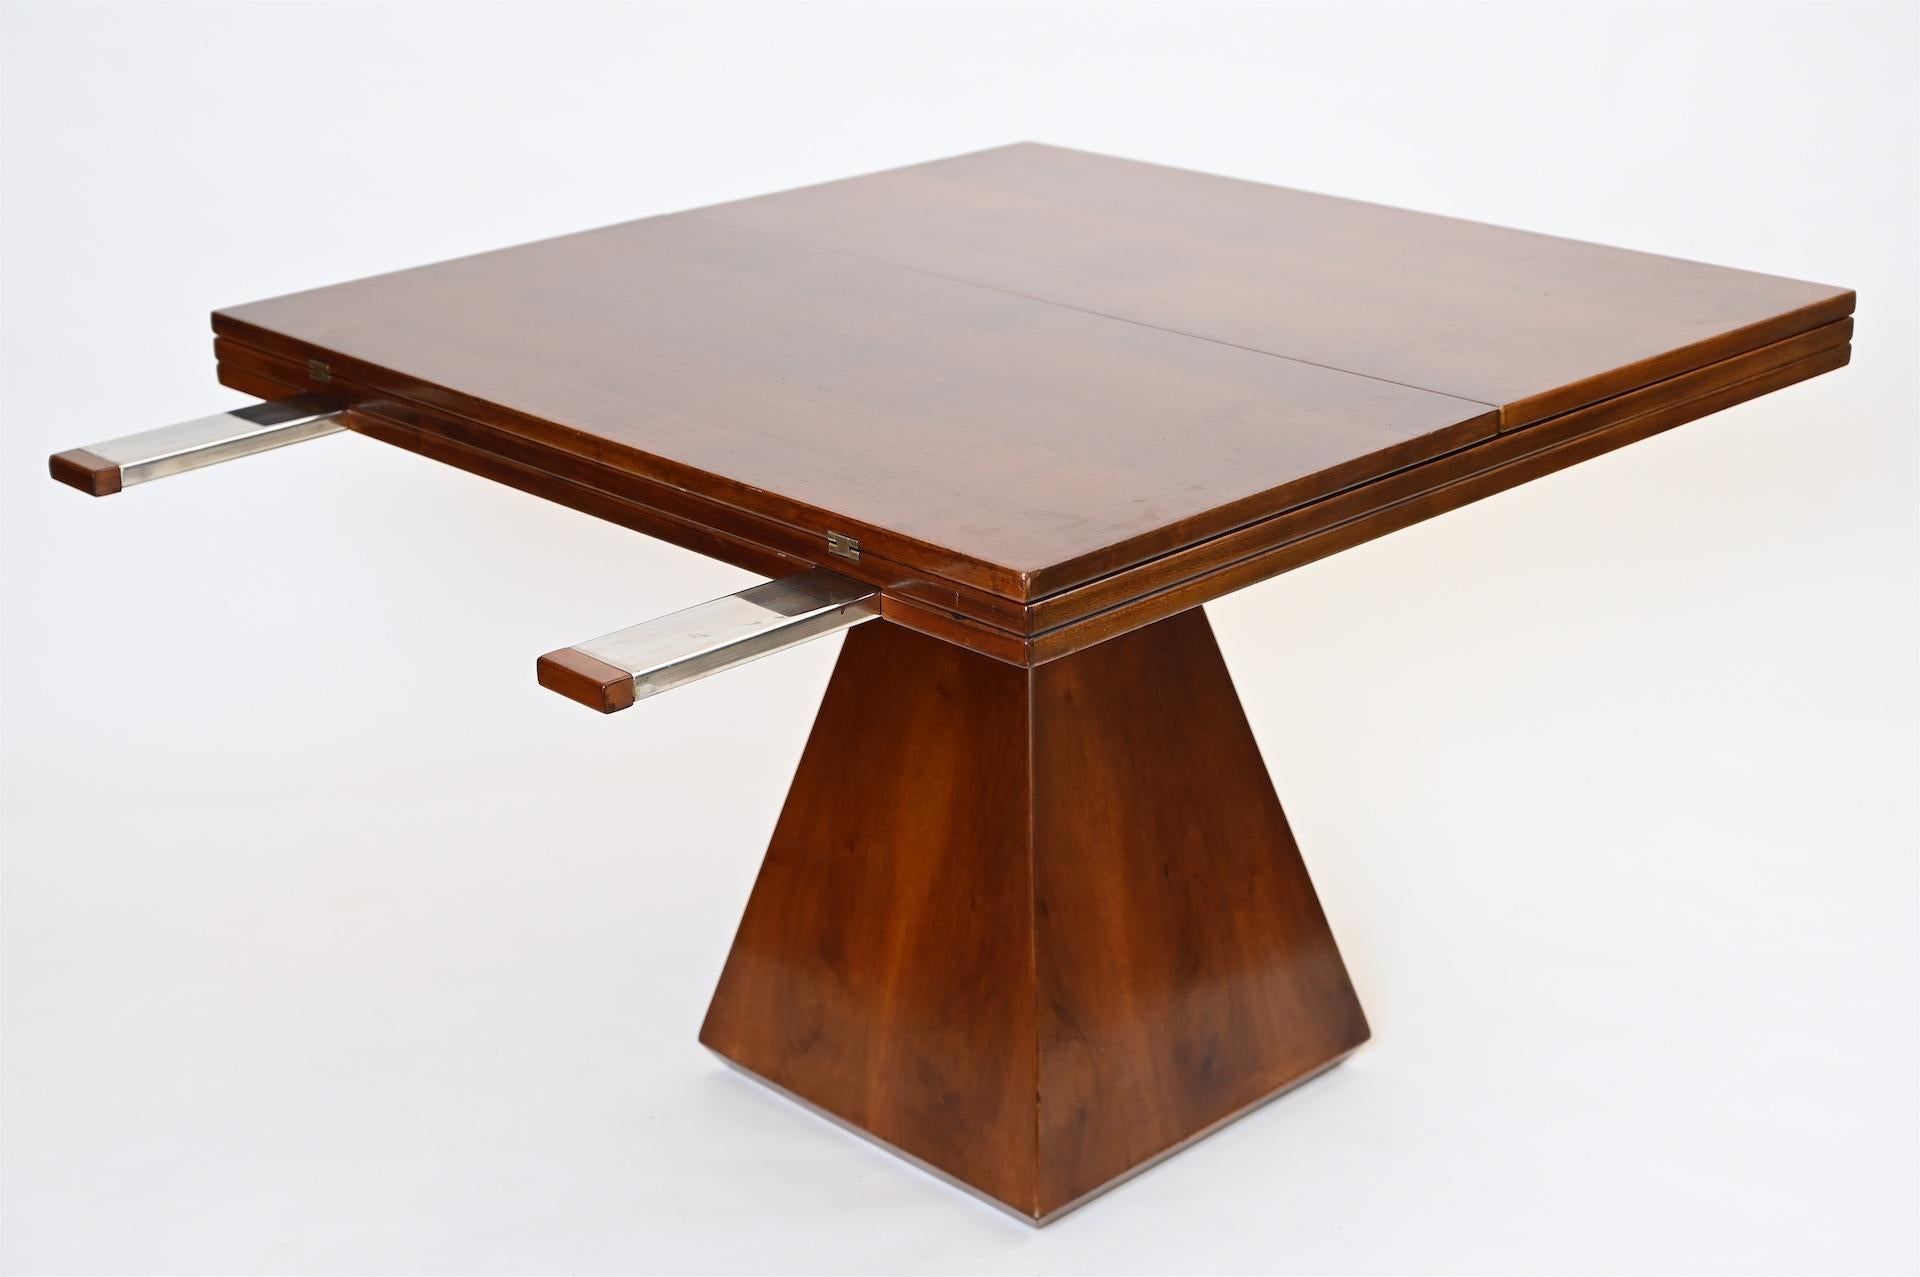 Mid-20th Century Geometric Expanding Table in Walnut circa 1960 by Introini